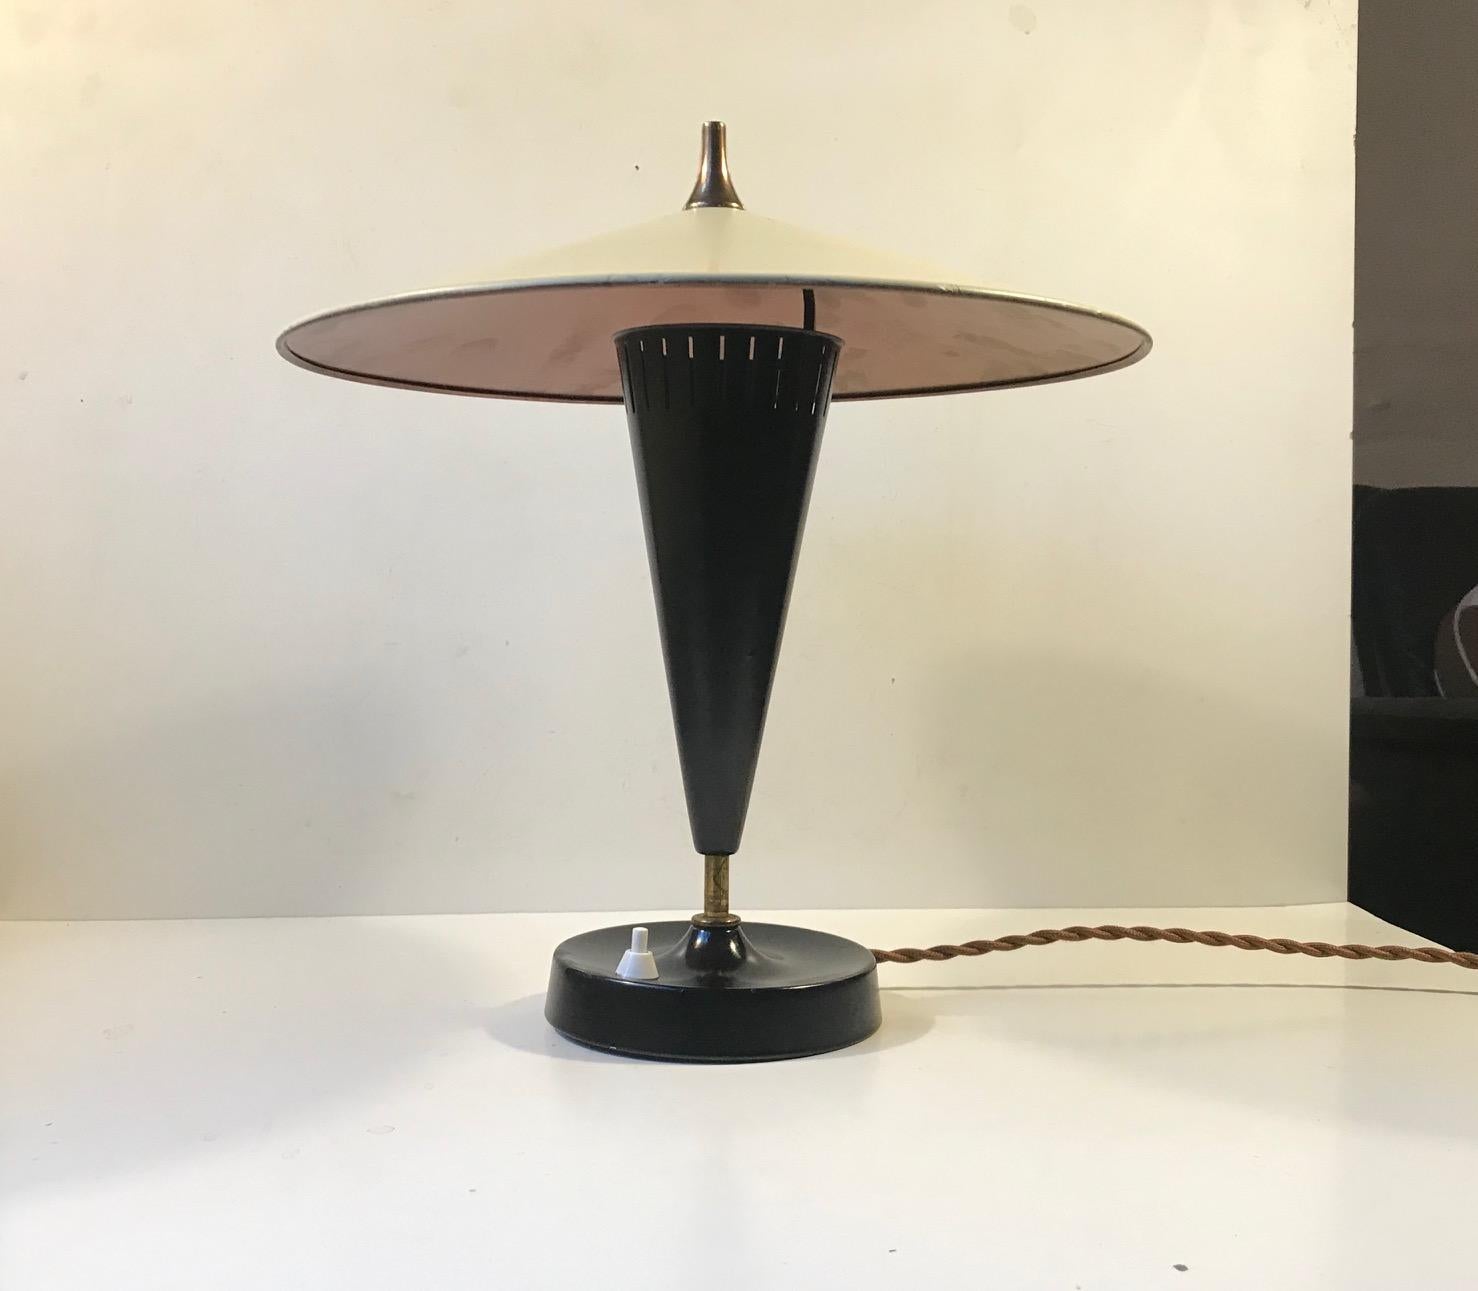 Very early unidentified German table light. It is fashioned out of aluminium, brass and bakelite. The shade has been restored and refinished at some point. The slightly yellowish main-shade has a copper lacquer applied to the inside. This gives a